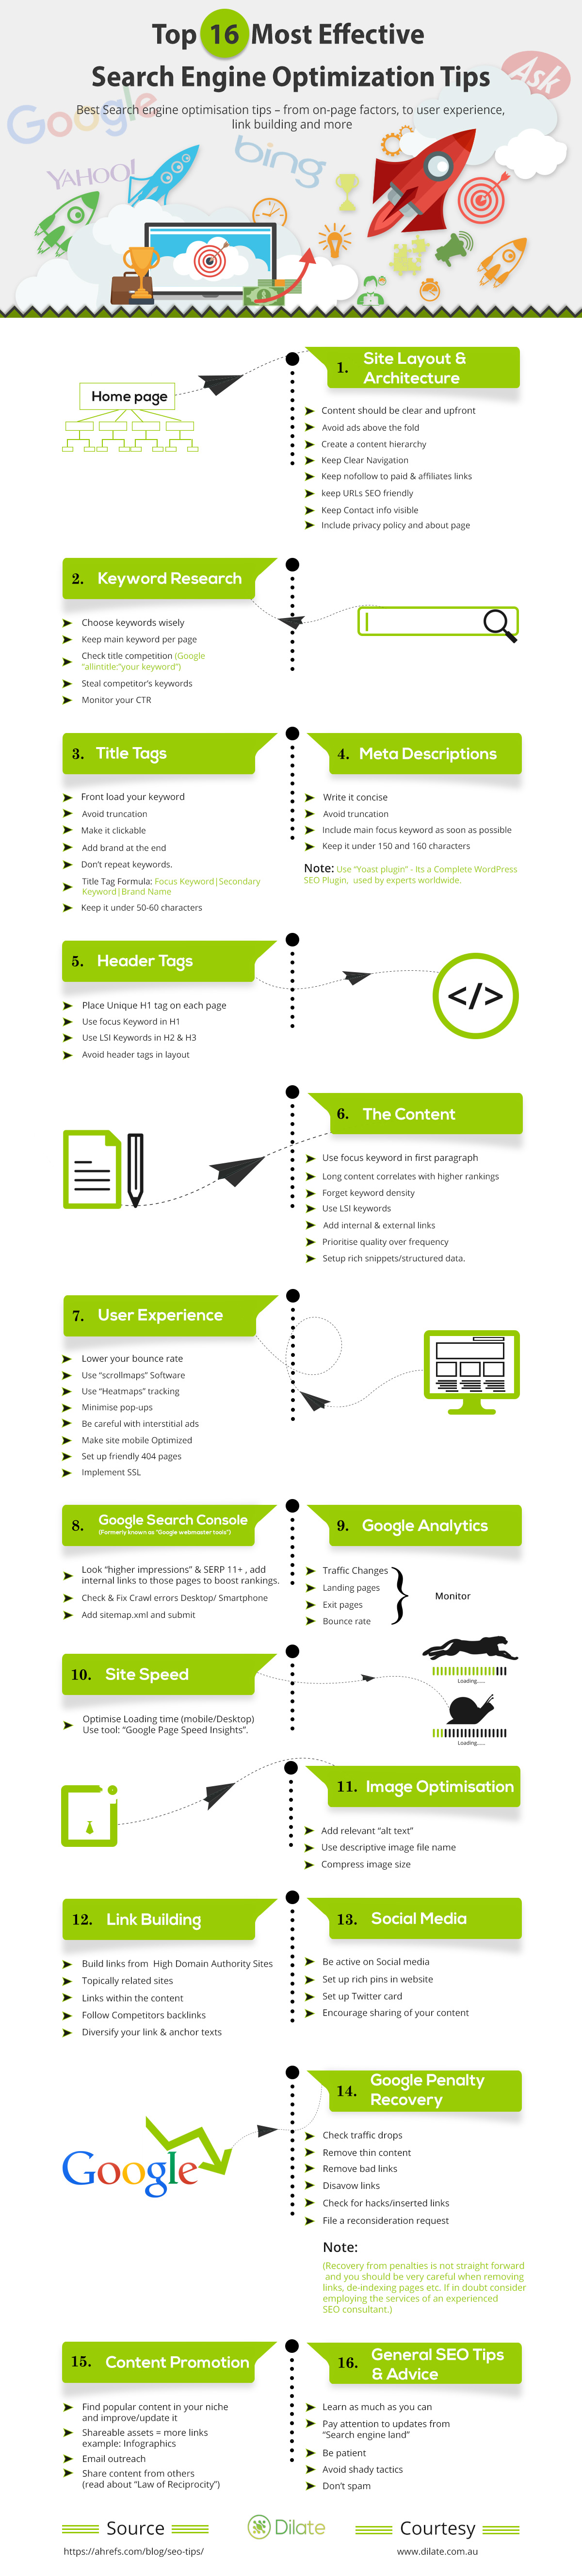  Top 16 Most Effective Search Engine Optimization Tips - #infographic 